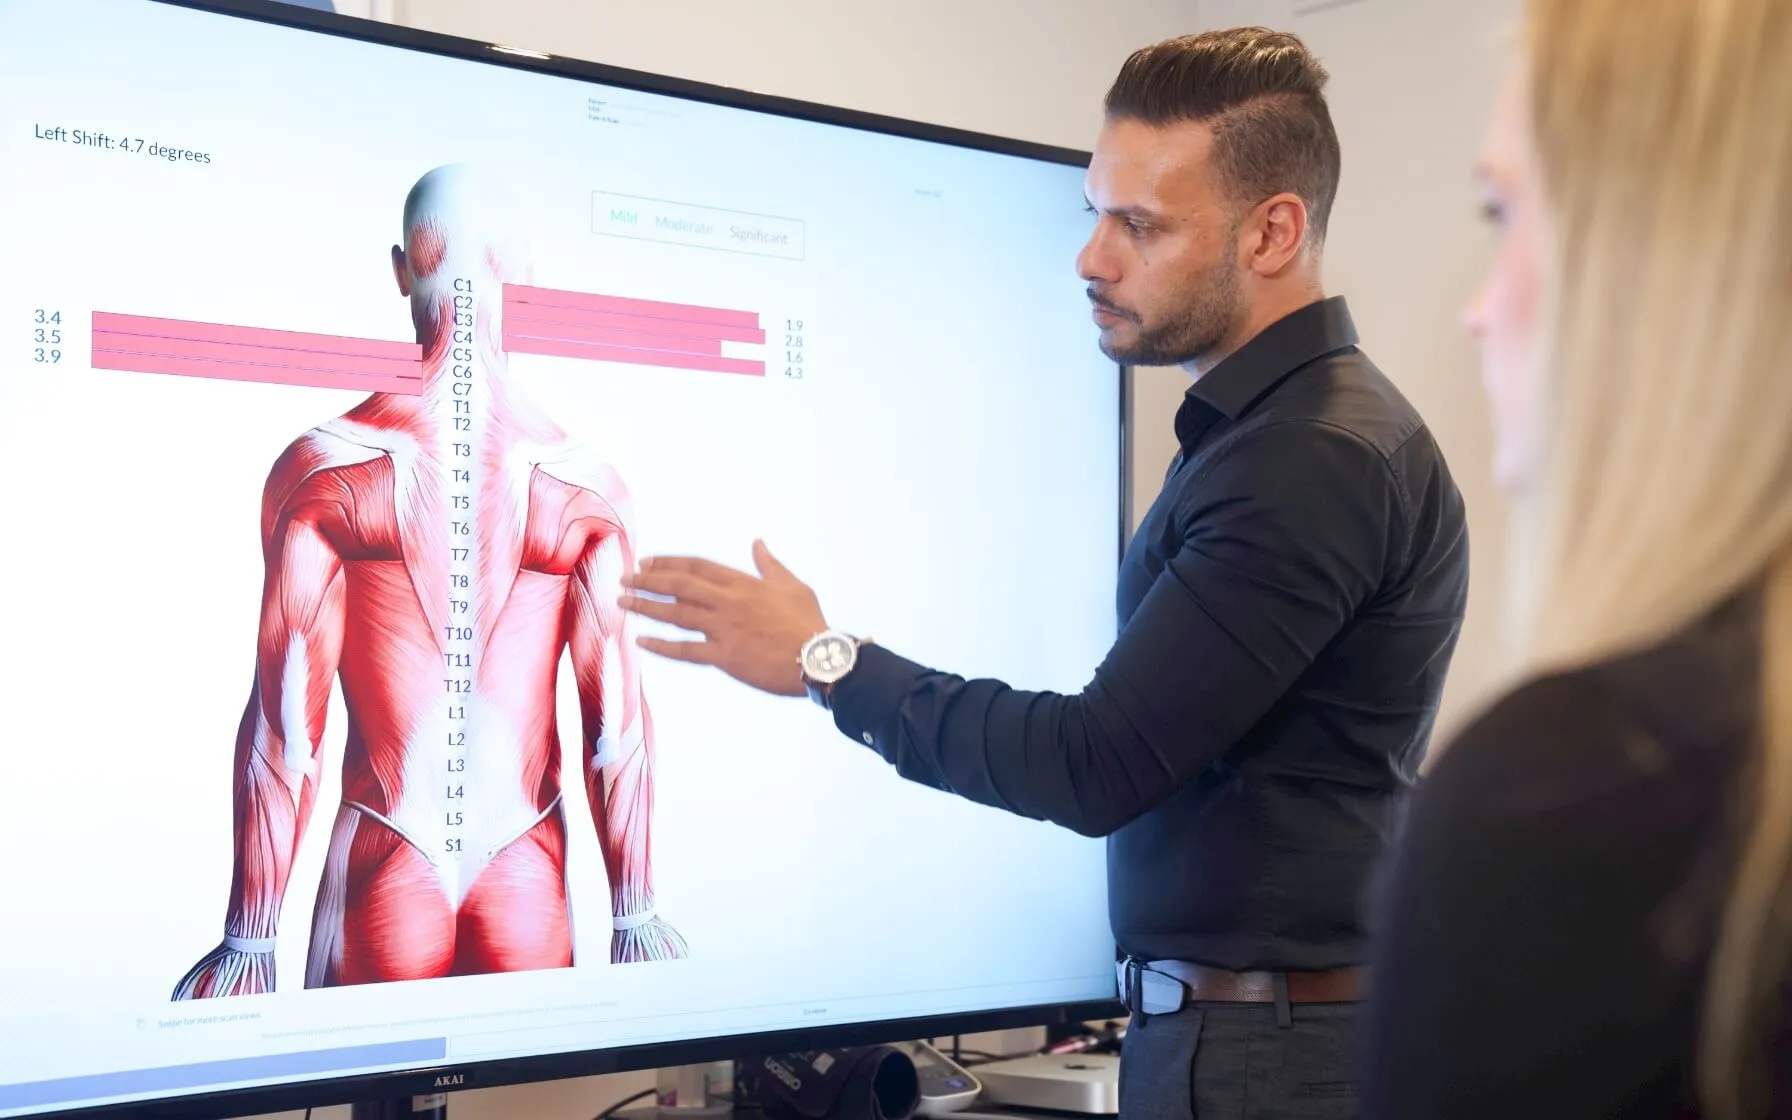 Chiropractor showing picture to patient